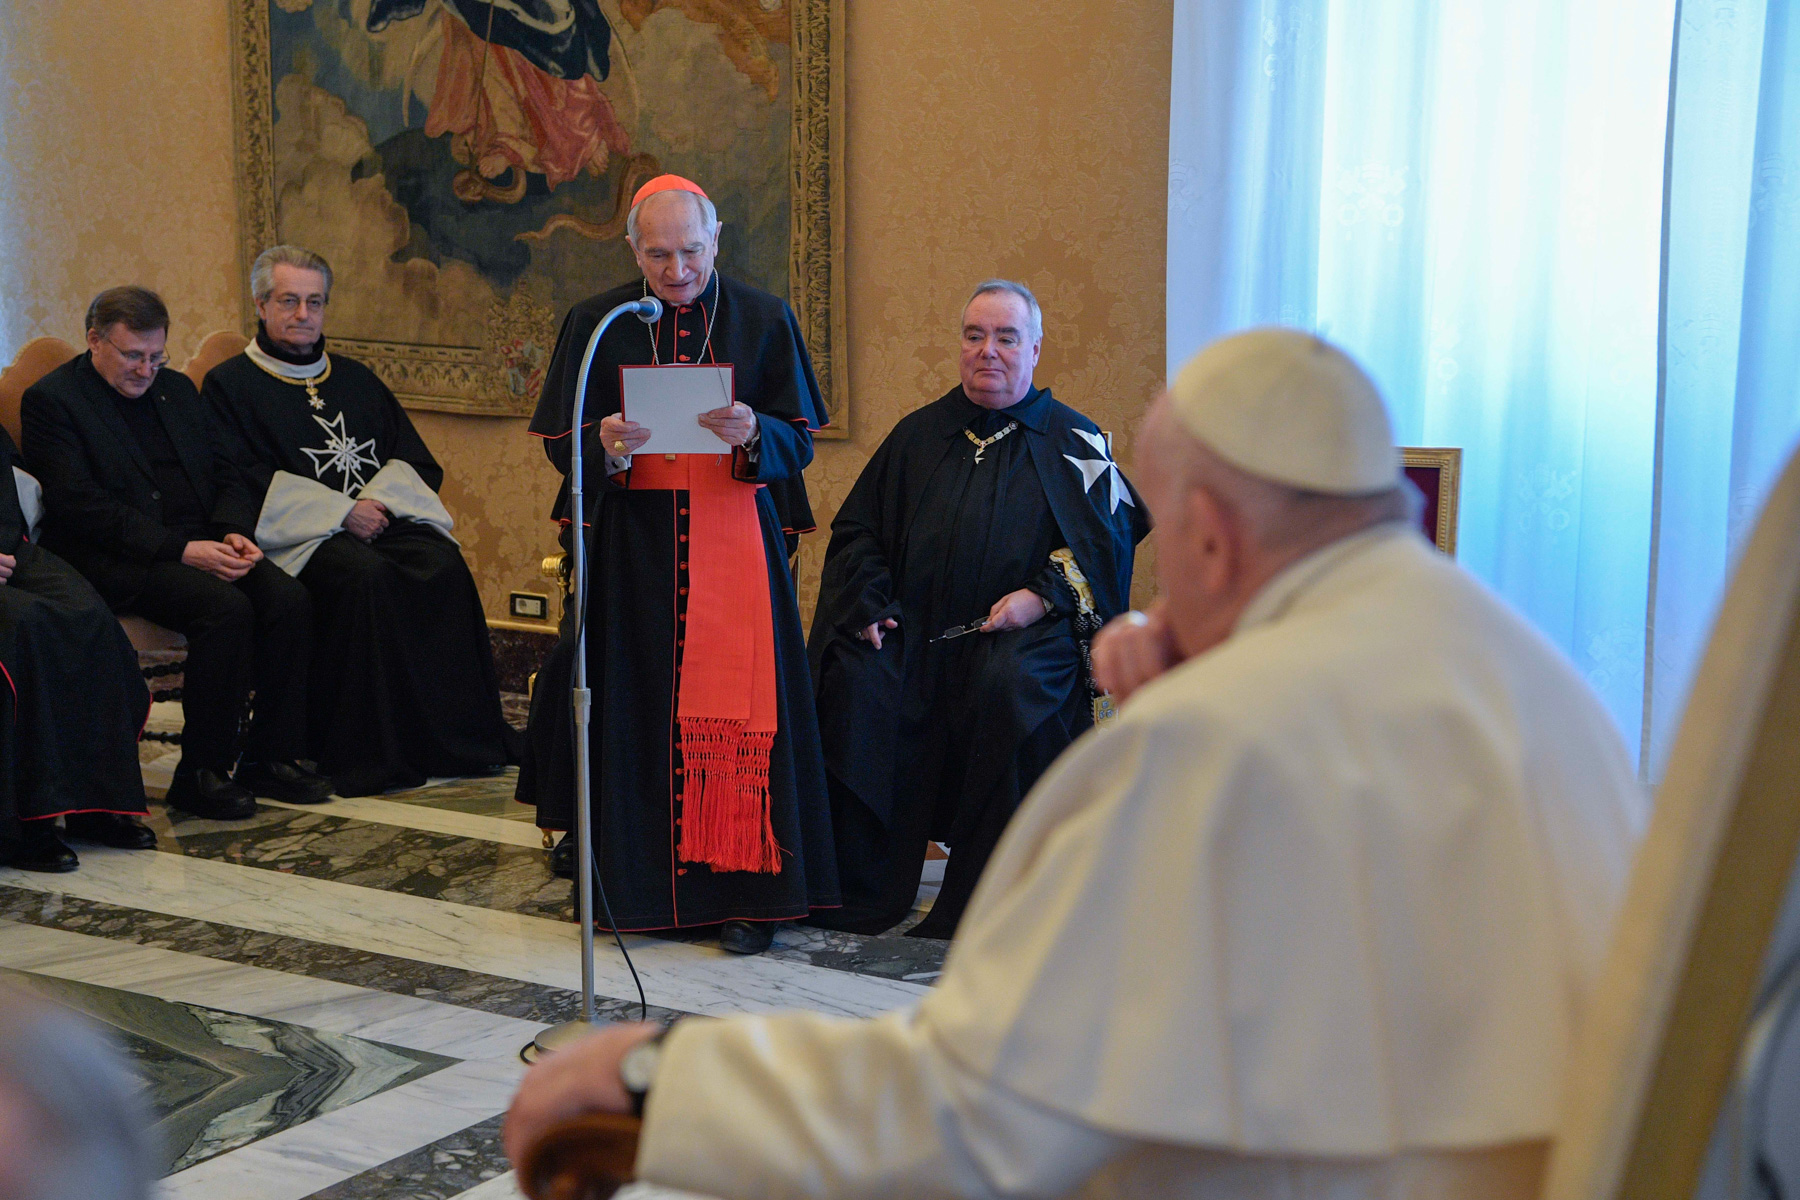 Pope Francis Receives the Capitulars in Audience and blesses the Order of Malta